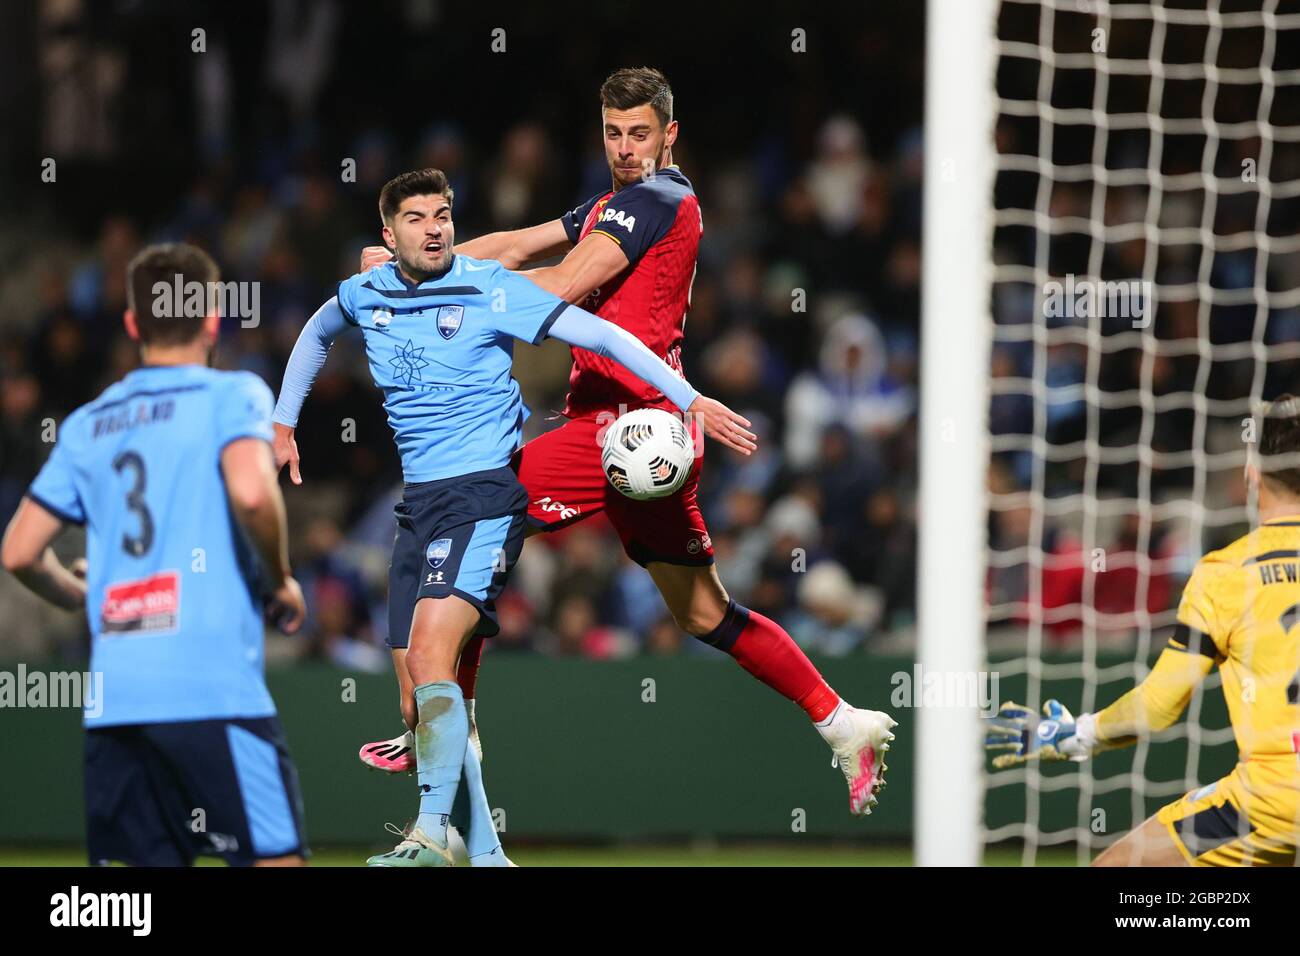 SYDNEY, AUSTRALIA - JUNE 19: Tomi Juric of Adelaide United heads the ball on goal during the A-League semi-final soccer match between Sydney FC and Adelaide United on June 19, 2021 at Netstrata Jubilee Stadium in Sydney, Australia. Credit: Pete Dovgan/Speed Media/Alamy Live News Stock Photo